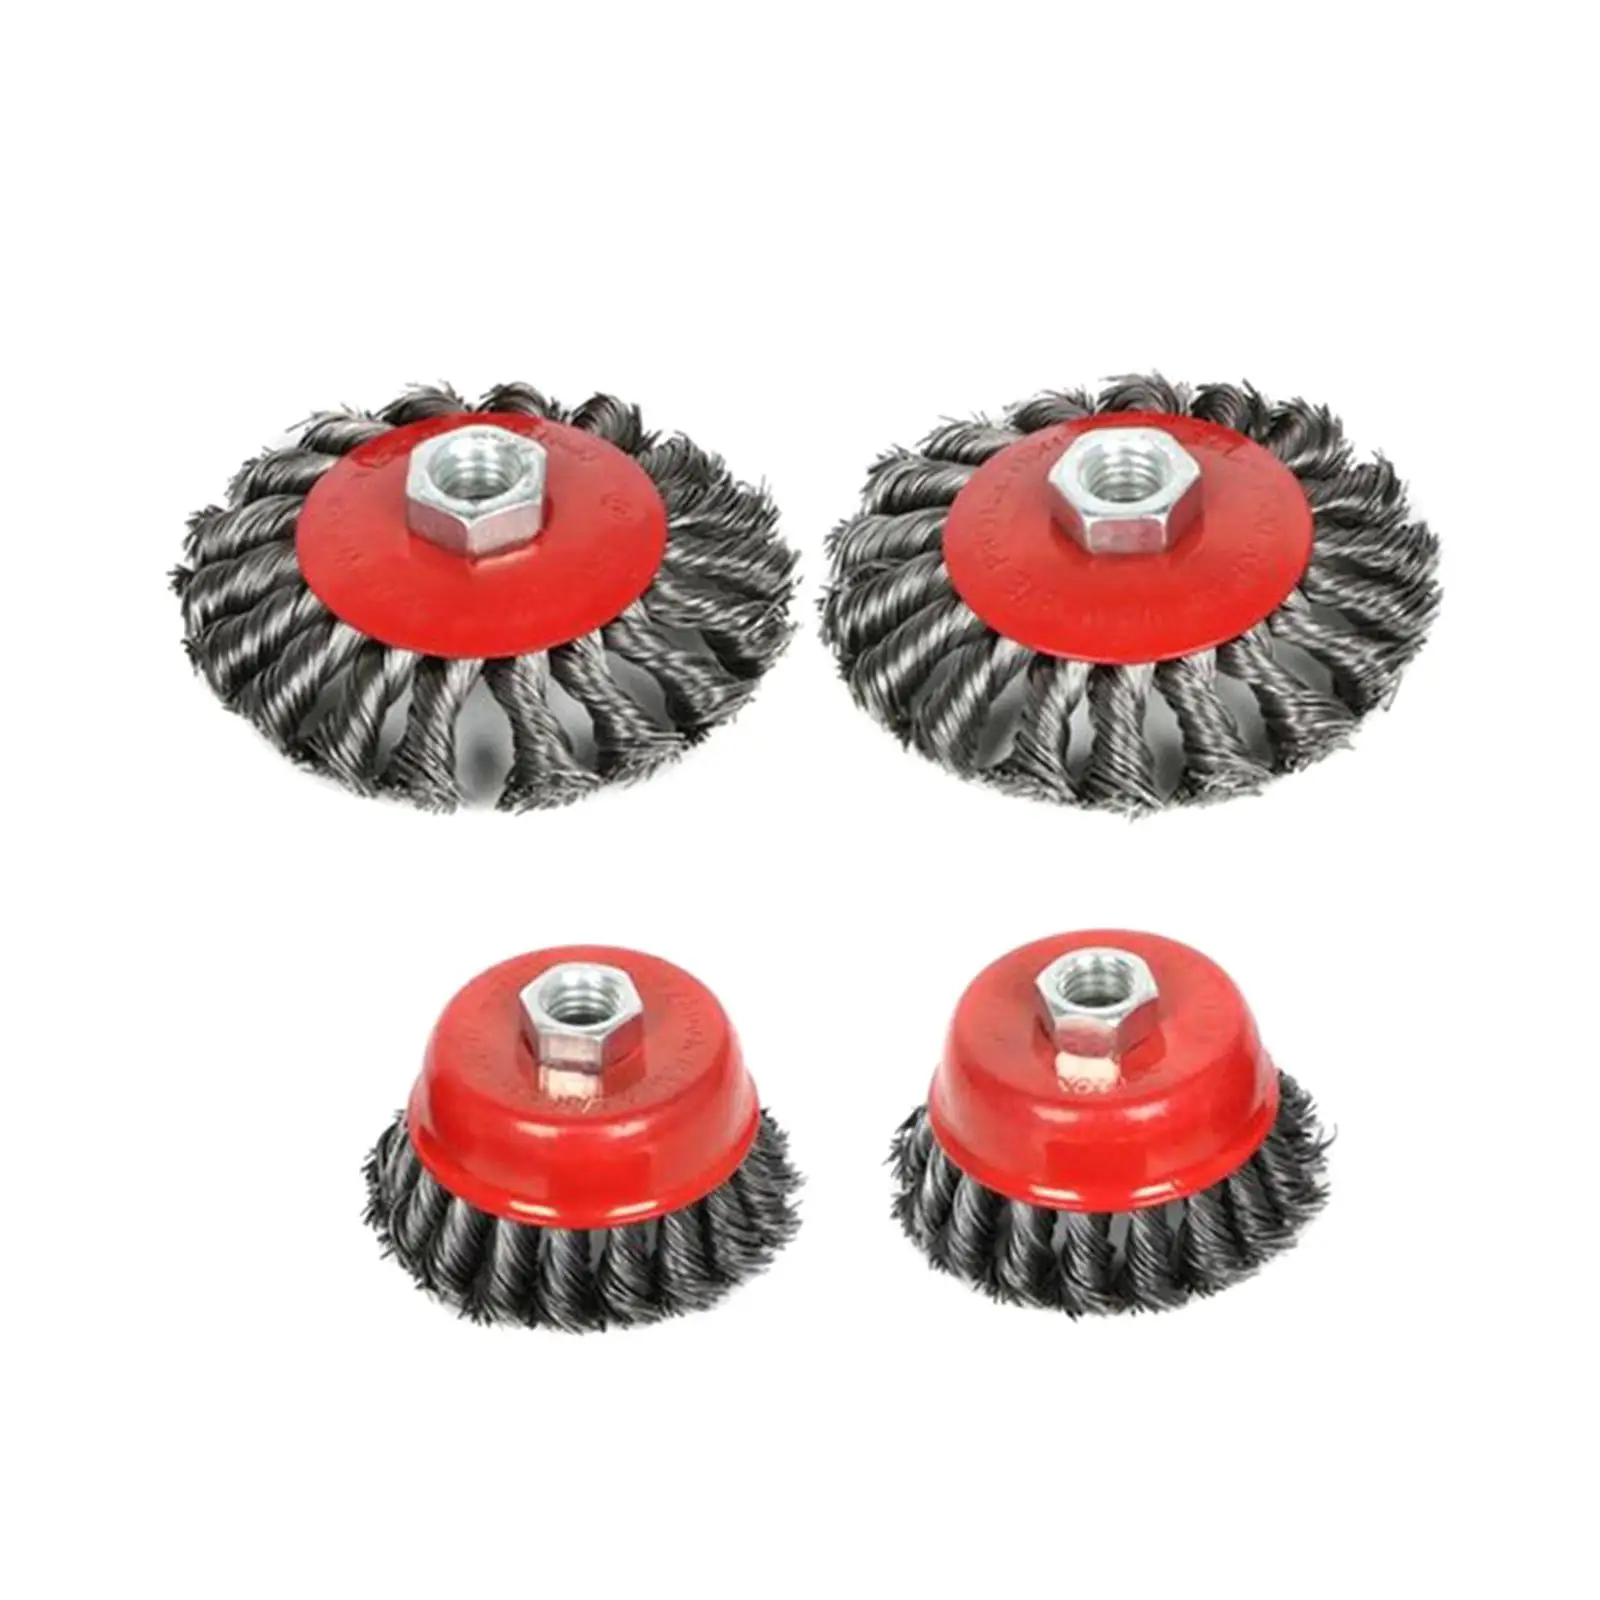 4x Twisted Knotted Cup Brush, Wire Brush Wheel Cup Brush for Descaling, Roughening, Grinding, Deburring